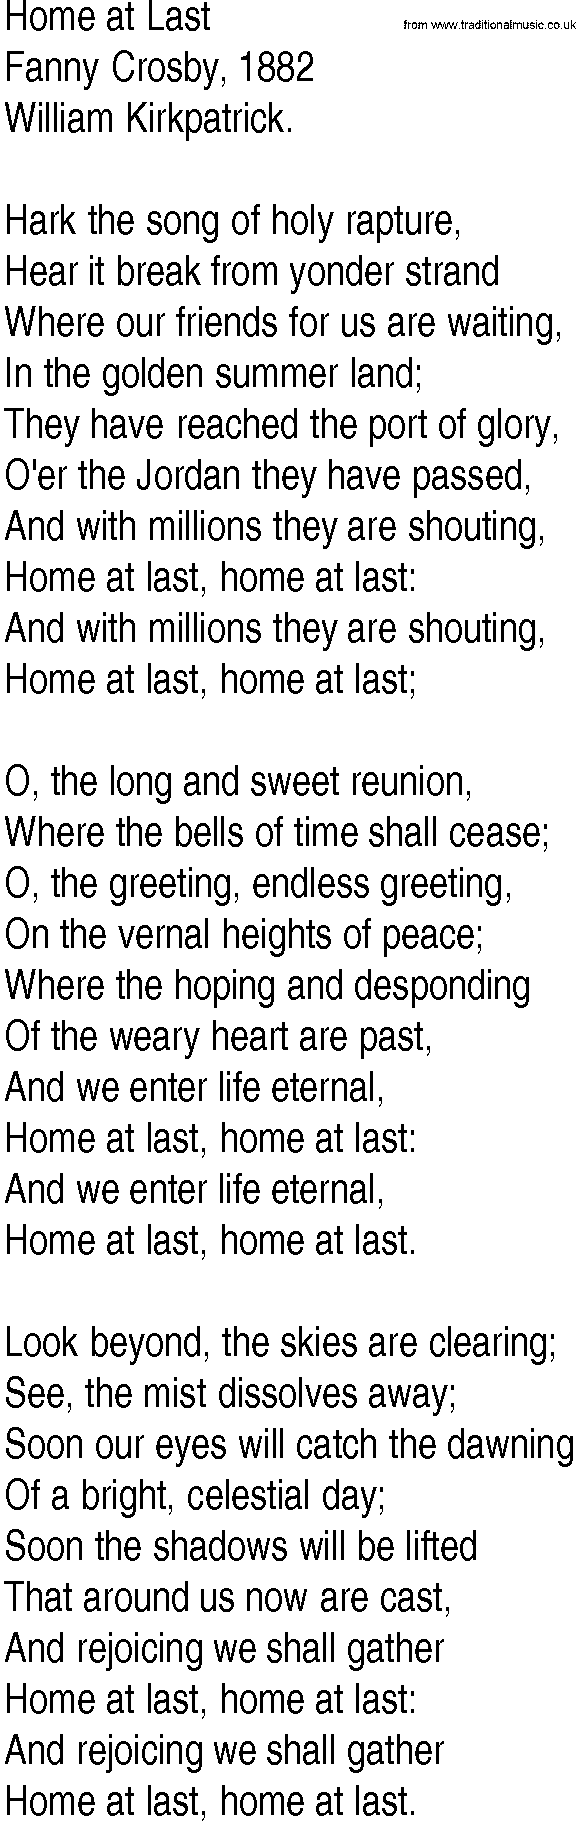 Hymn and Gospel Song: Home at Last by Fanny Crosby lyrics